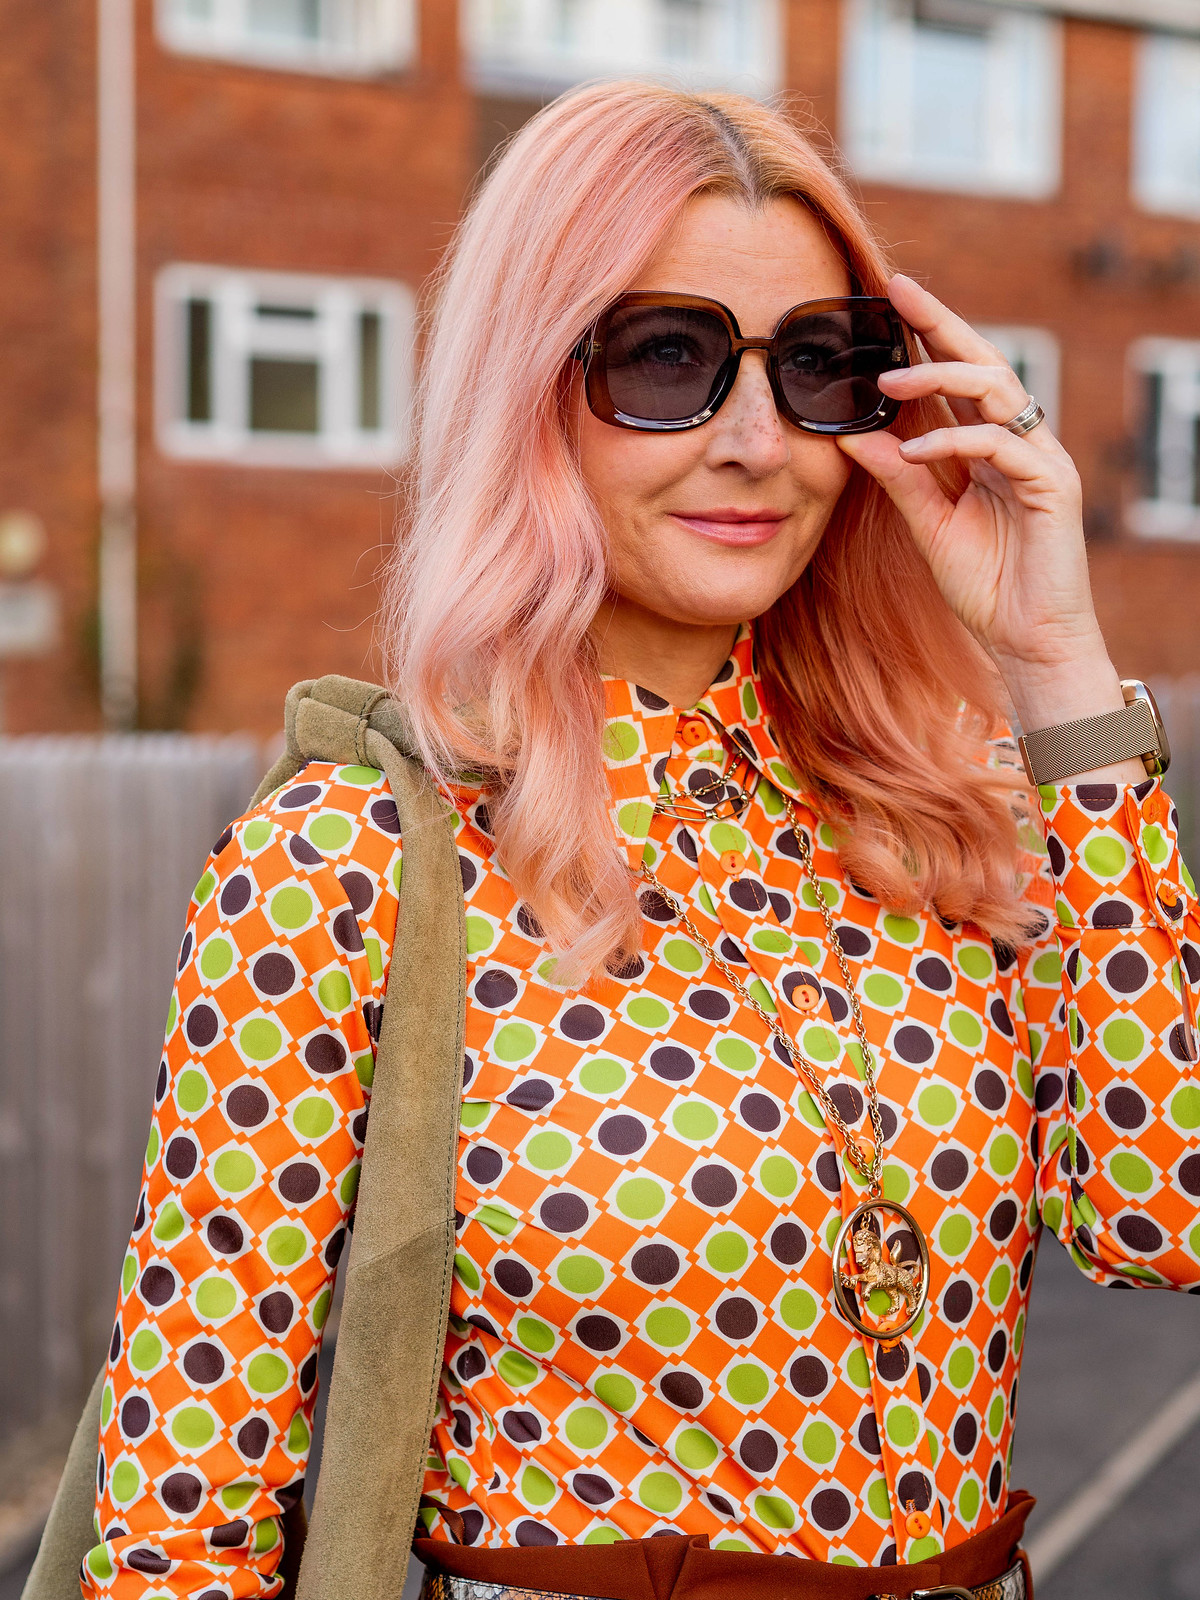 Styling a Vintage 70s Shirt With Vintage Jewellery: Catherine Summers is wearing an orange, green and brown patterned vintage 70s shirt with gold jewellery, brown paperbag trousers, pointed flats & oversized sunglasses | Not Dressed As Lamb, Over 40 Style